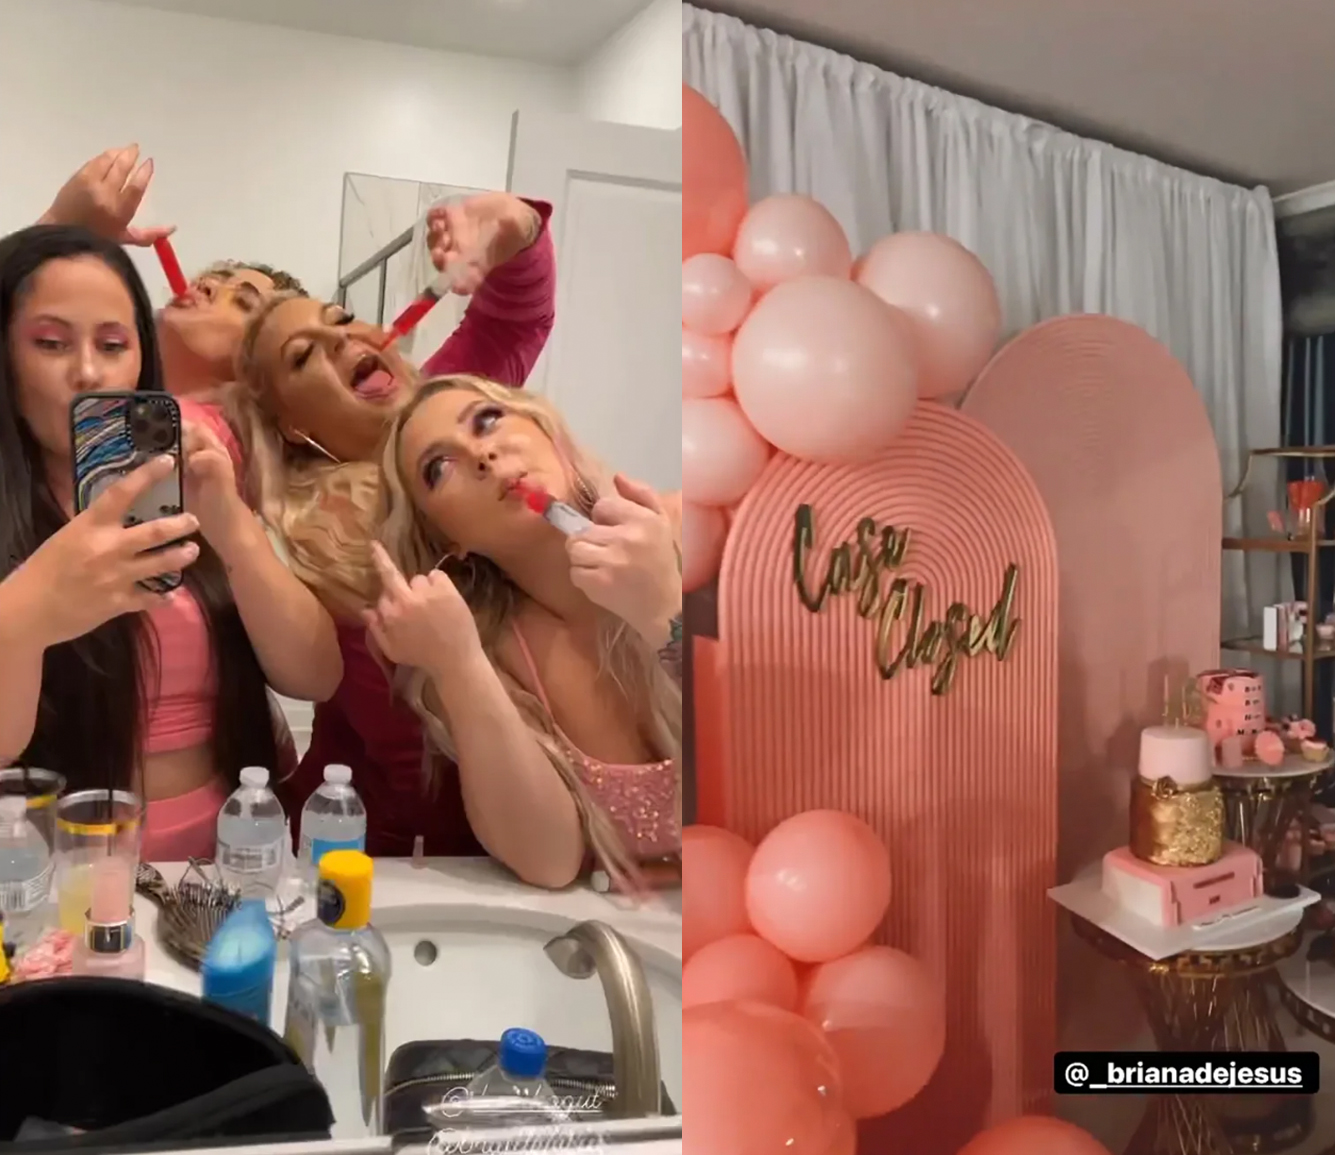 Teen Mom's Briana DeJesus Throws Party Celebrating Kailyn Lowry Lawsuit Victory!